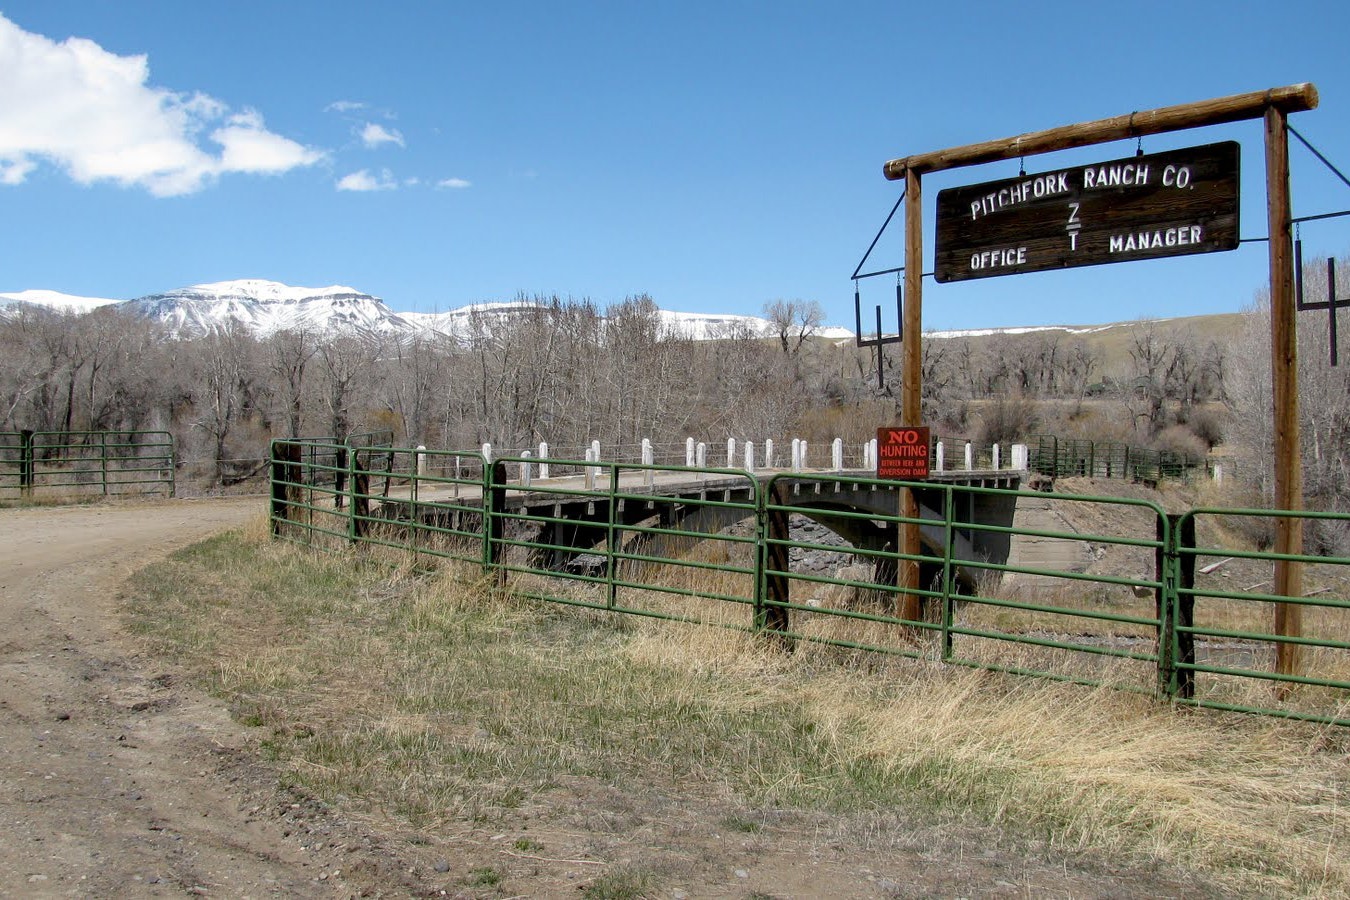 The Pitchfork Ranch has been around in Wyoming since 1878. Now a Texas ranch with the Pitchfork name founded in 1883 is suing for it.